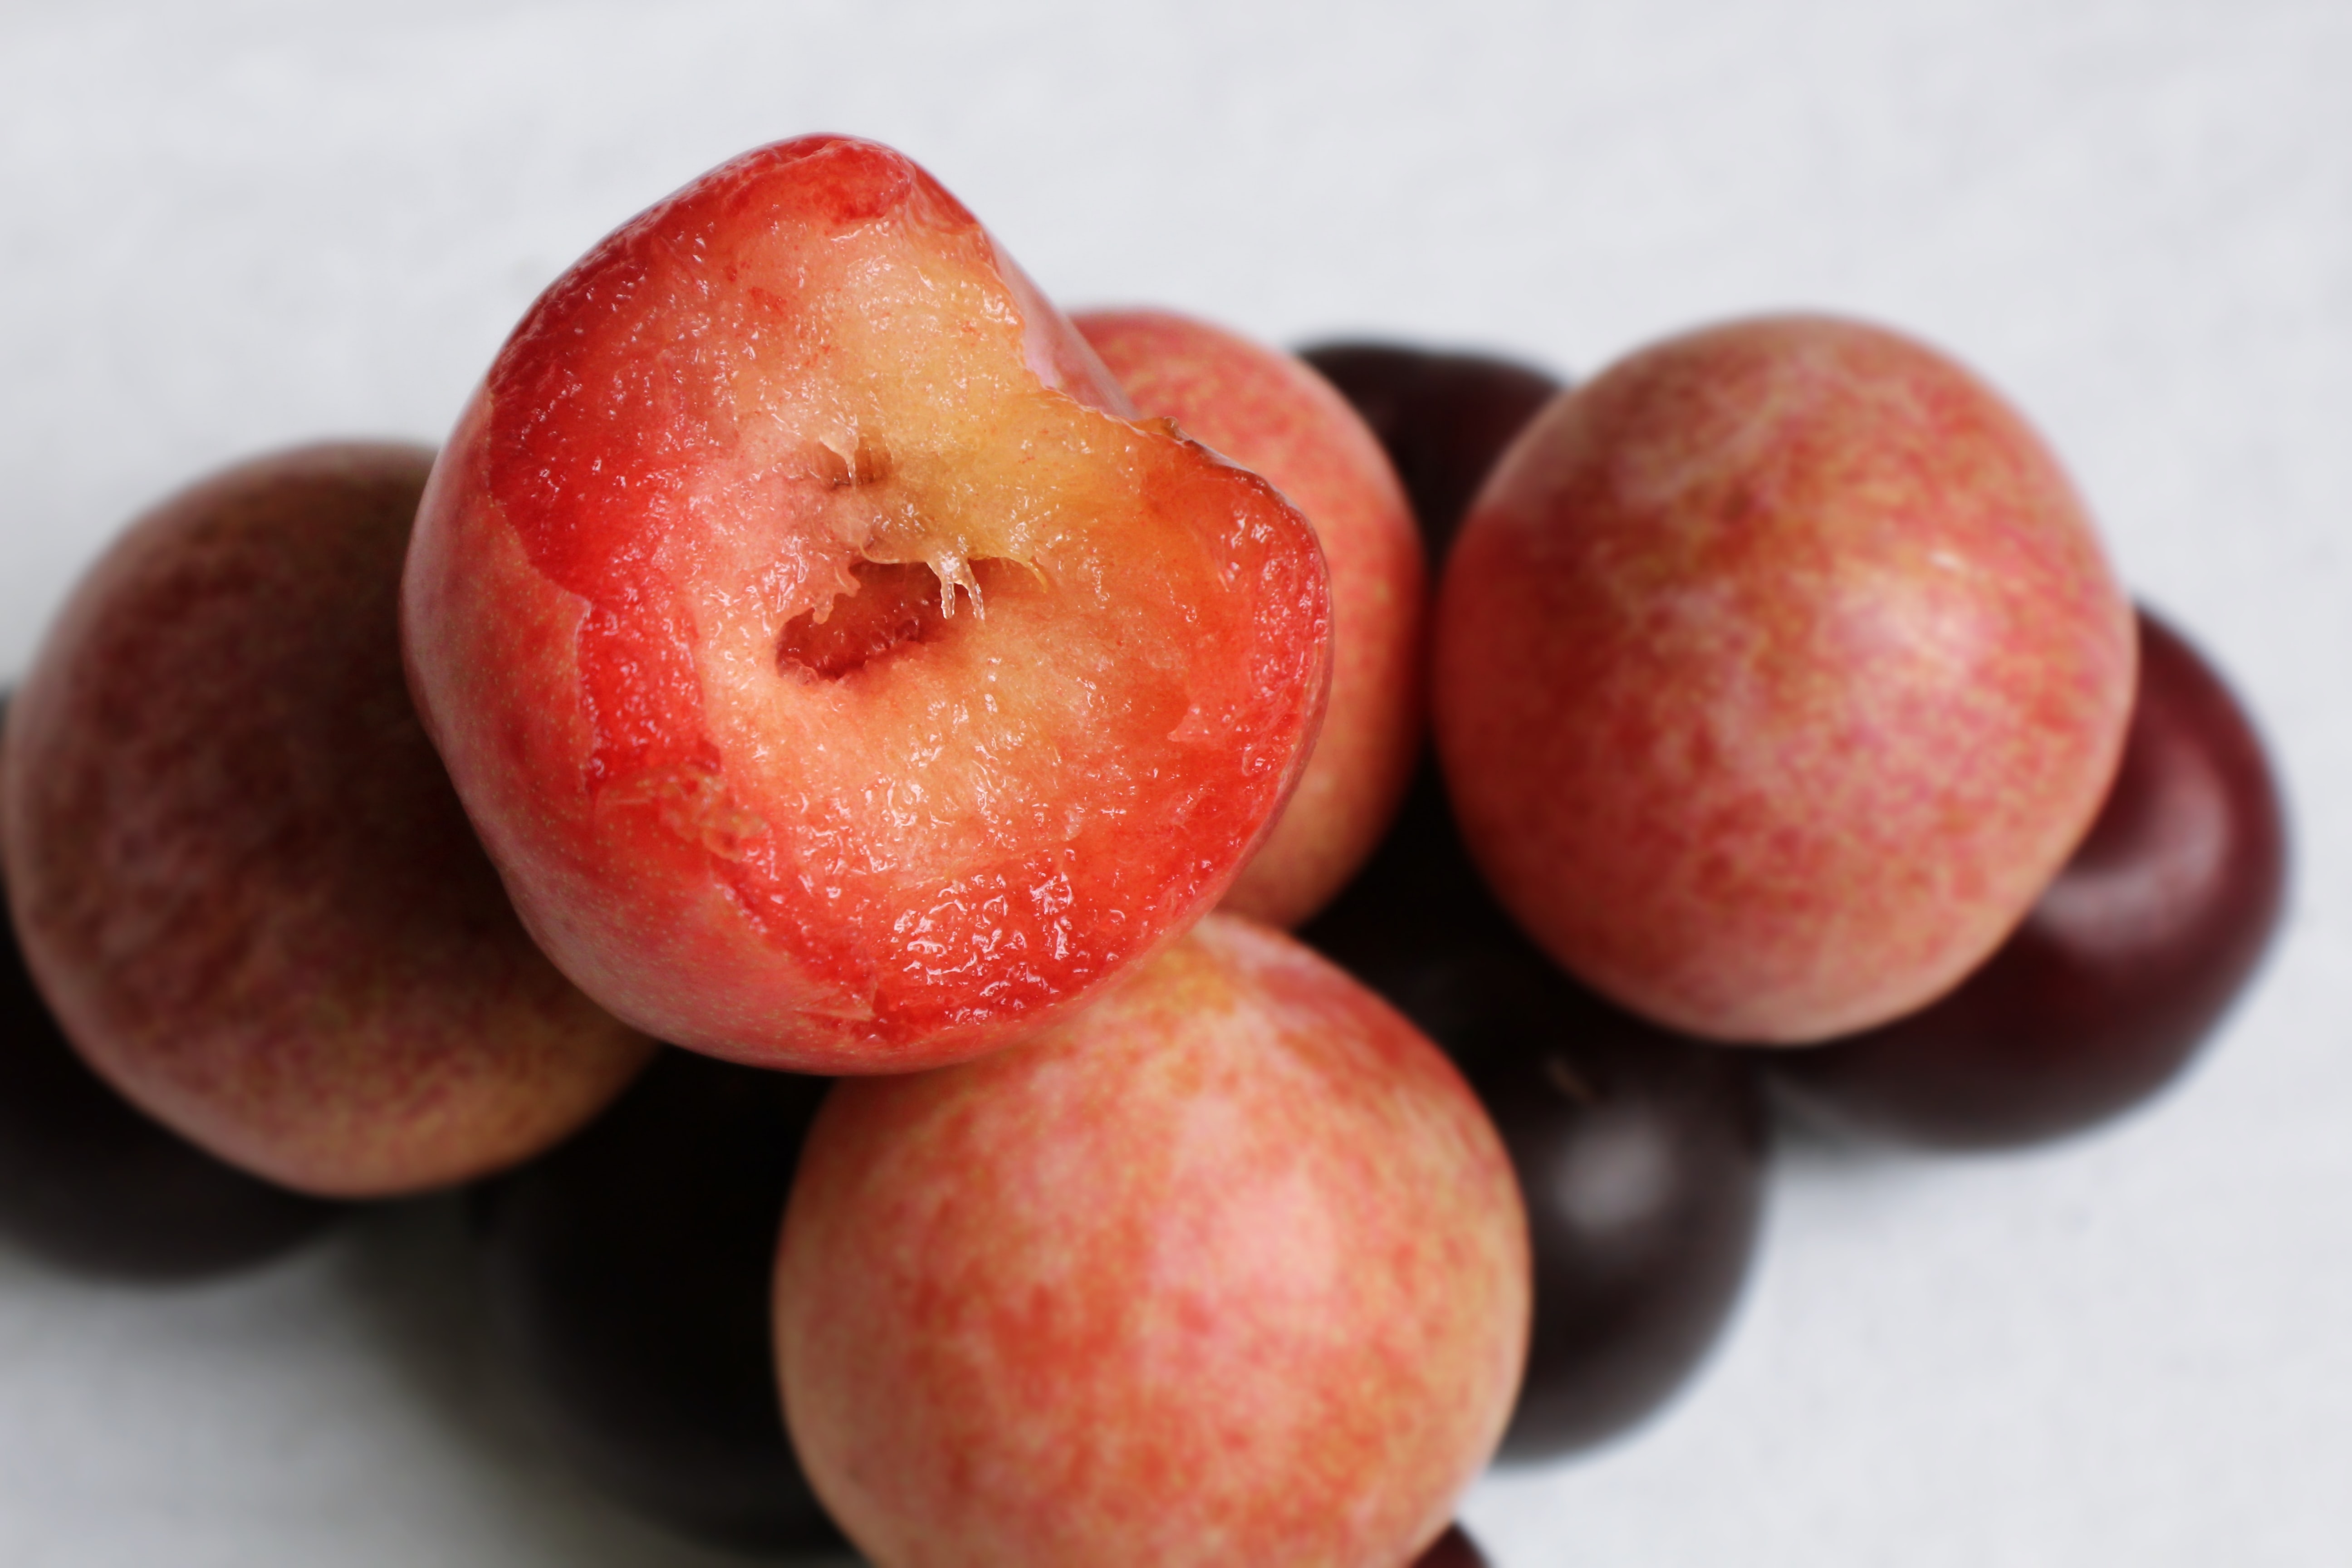 plums are in season in the uk in September